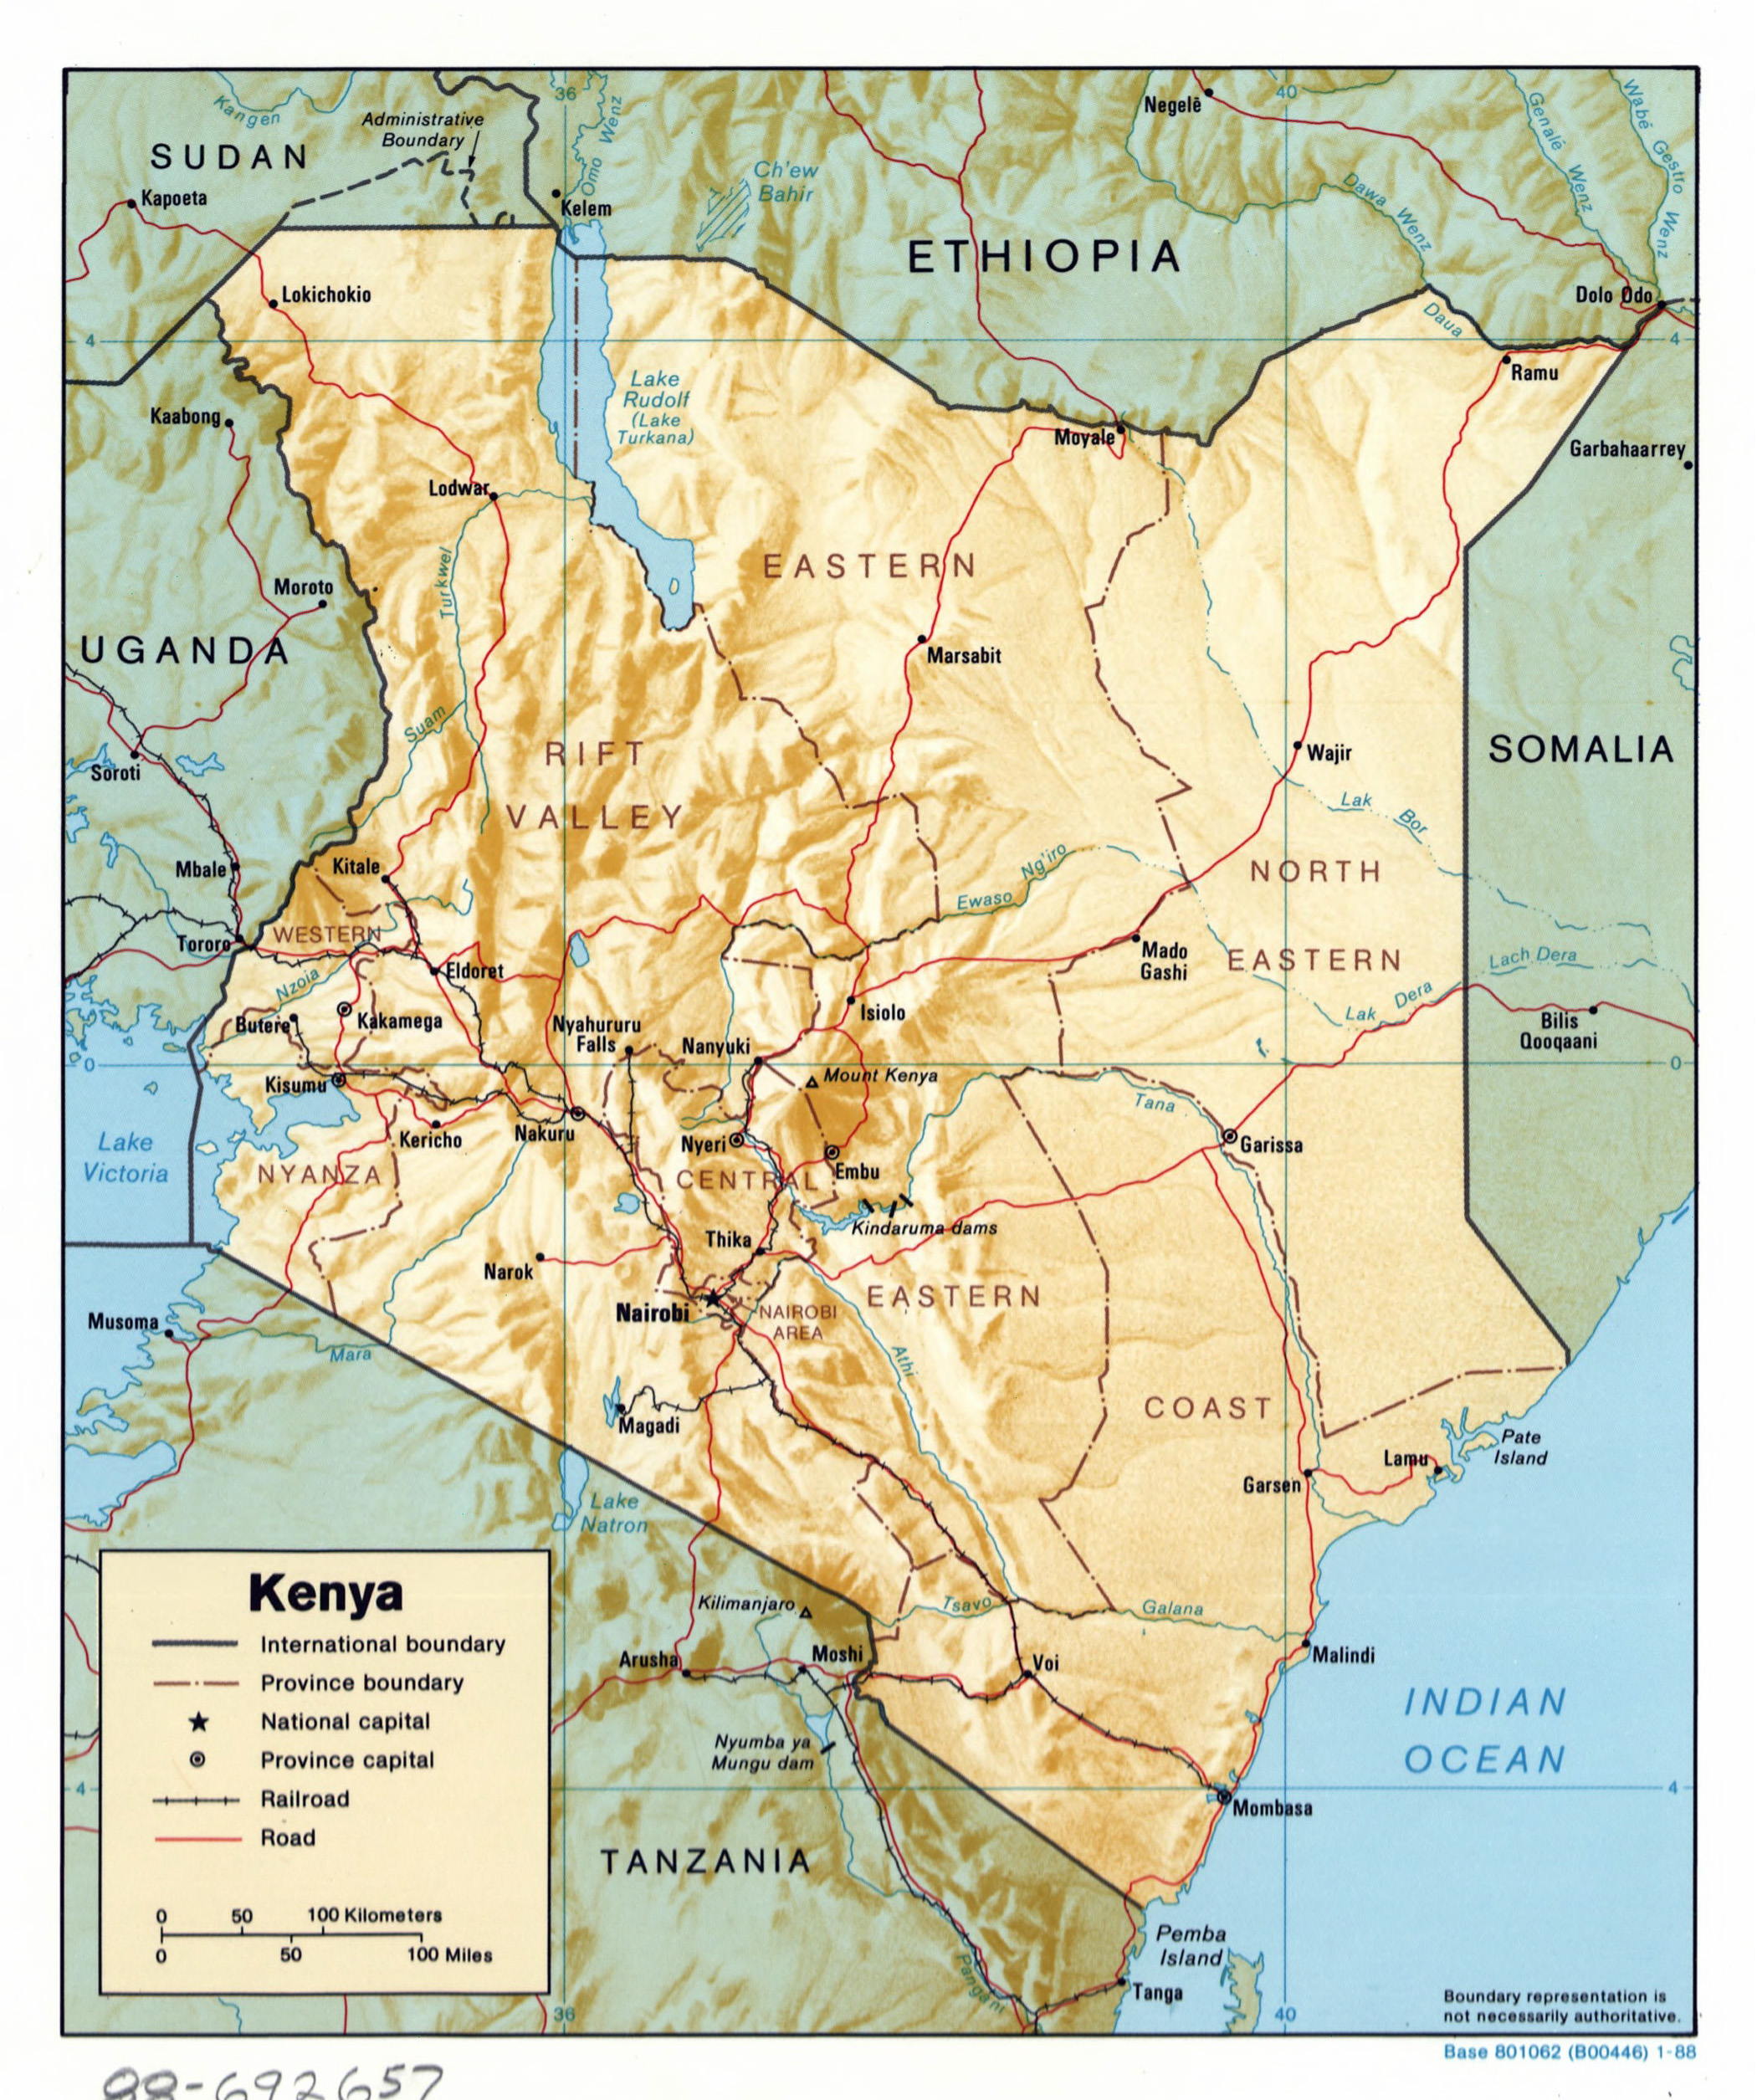 Large Detailed Political And Administrative Map Of Kenya With Relief Roads Railroads And Major Cities 1988 